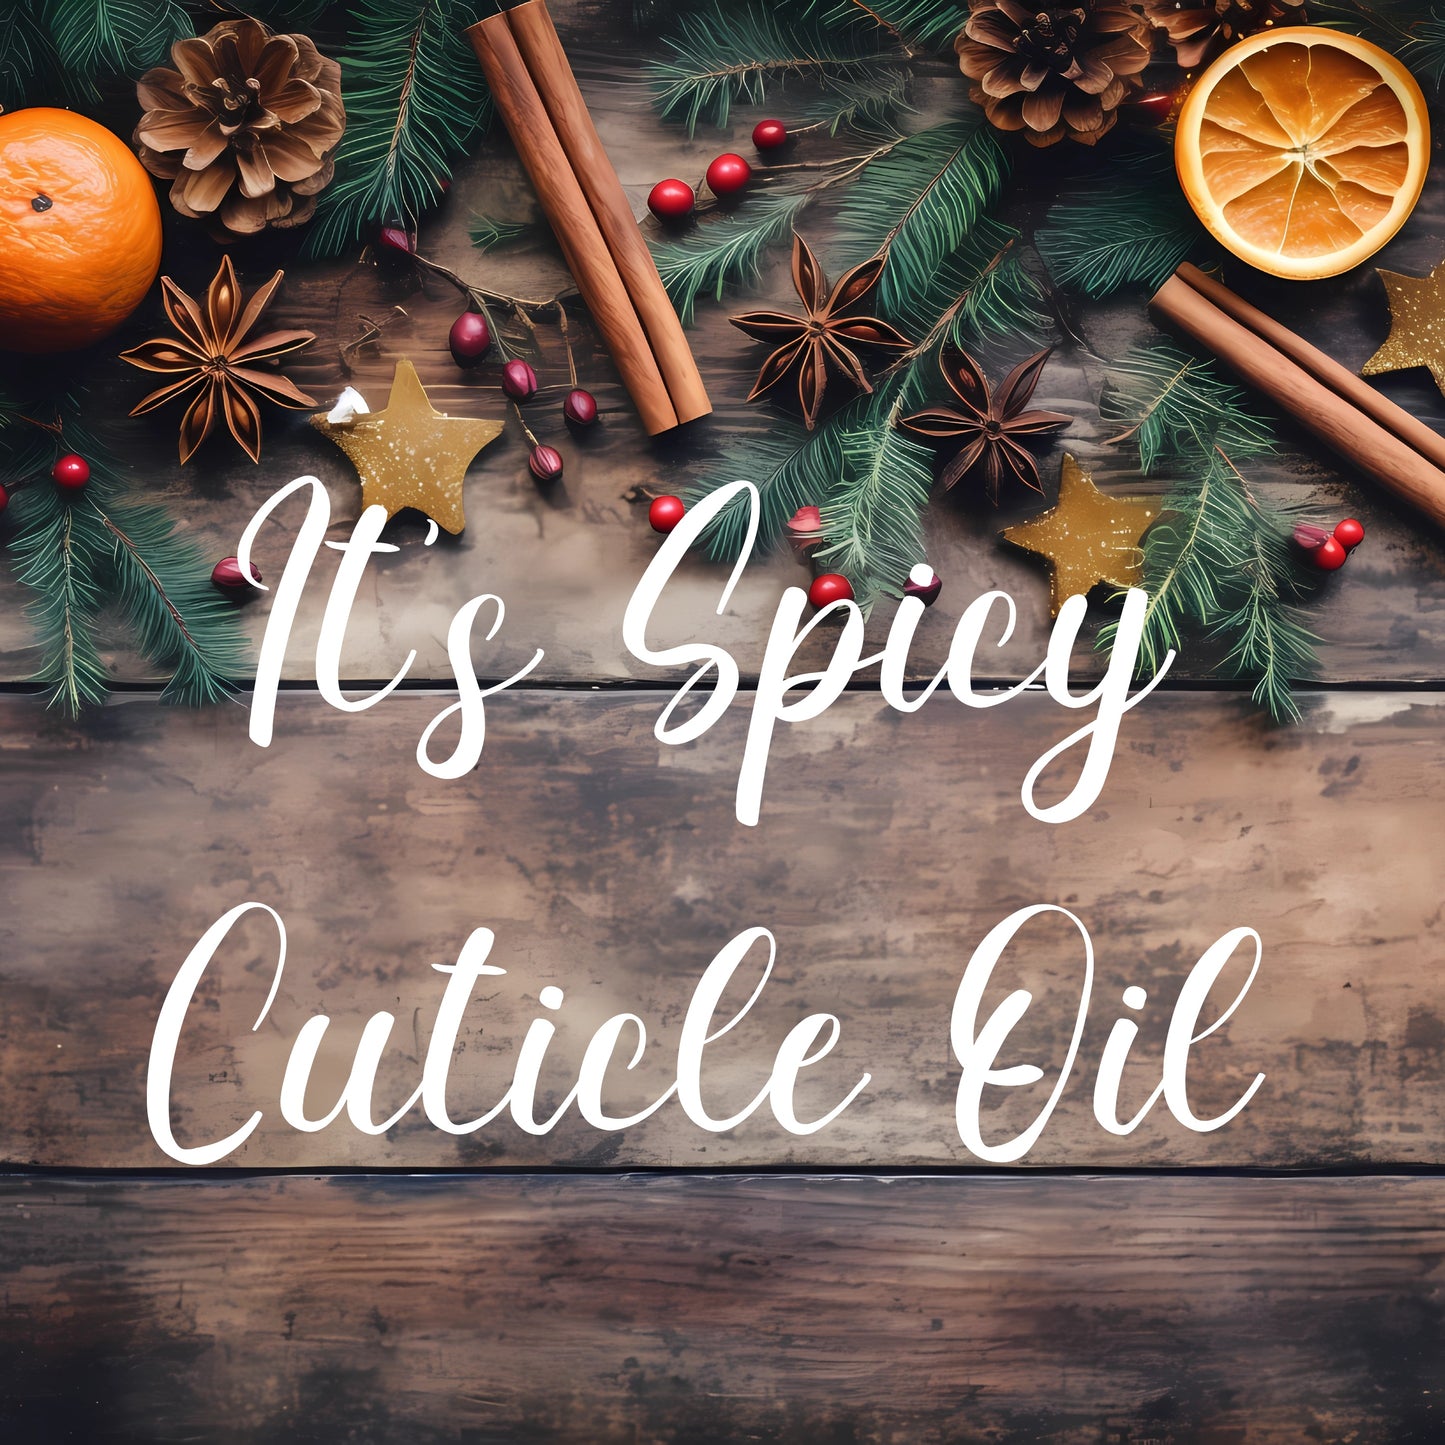 Winter Holiday Cuticle Oil- It's Spicy